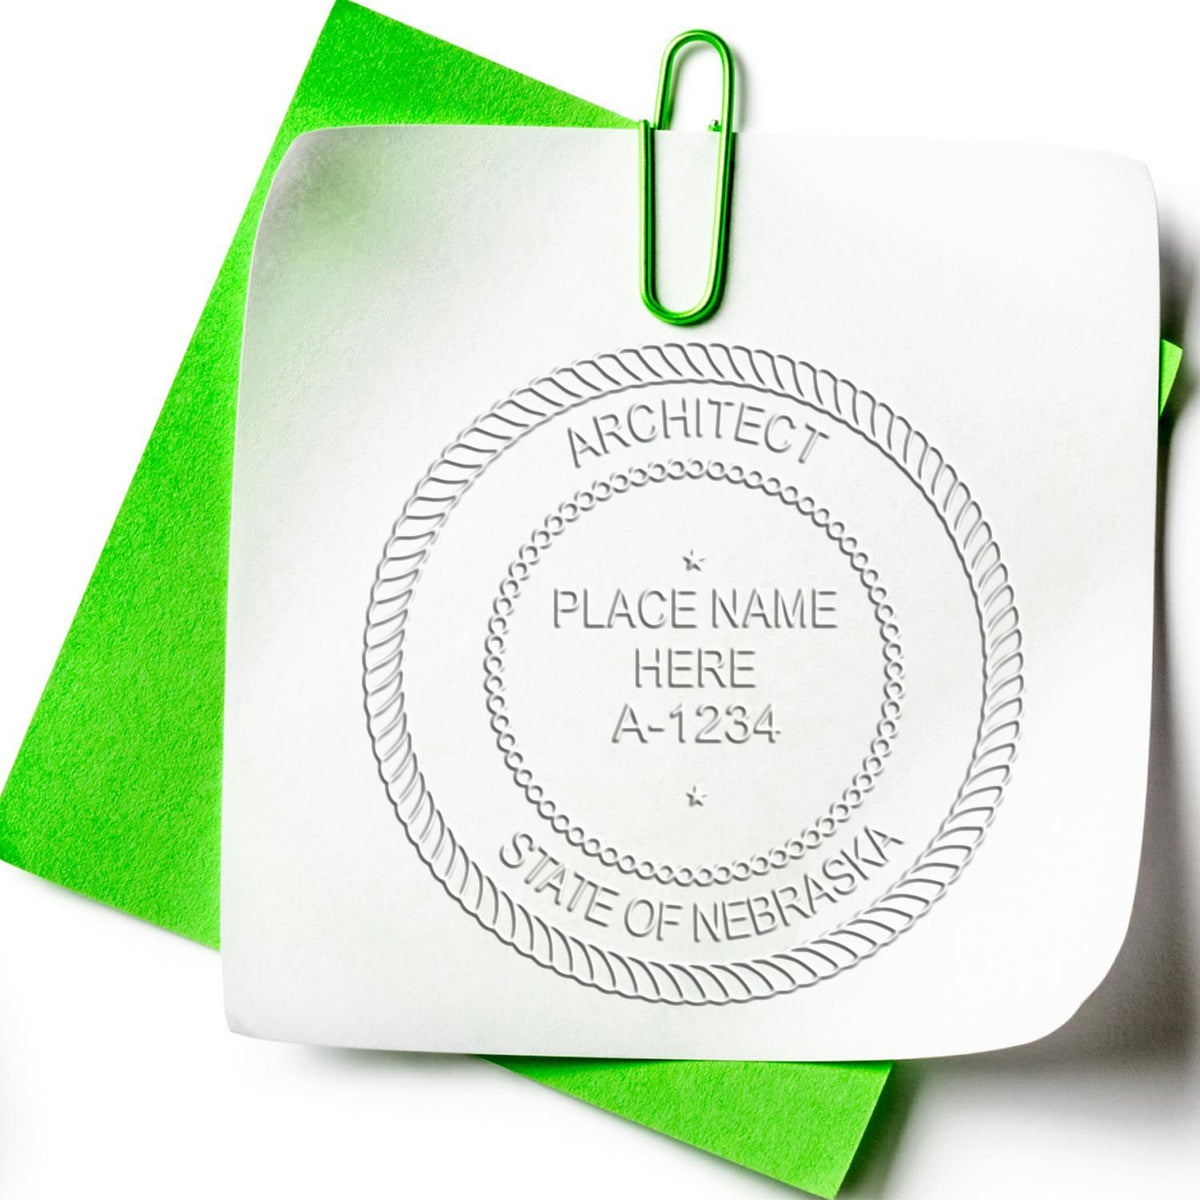 This paper is stamped with a sample imprint of the Extended Long Reach Nebraska Architect Seal Embosser, signifying its quality and reliability.